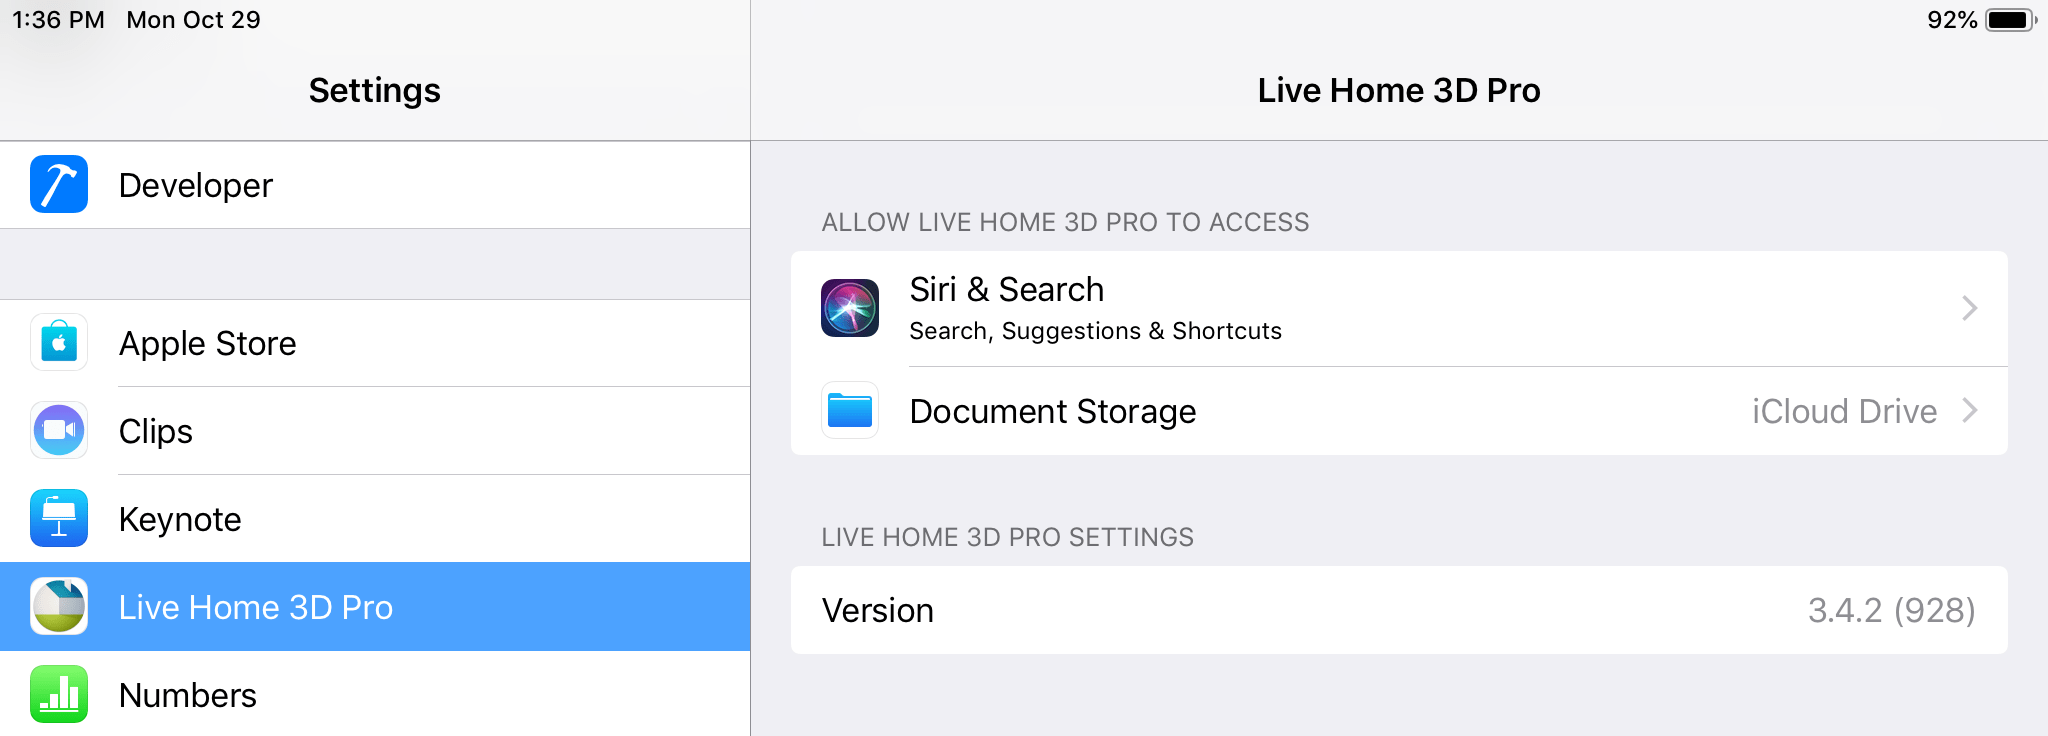 Live Home 3D section in the Settings of iOS